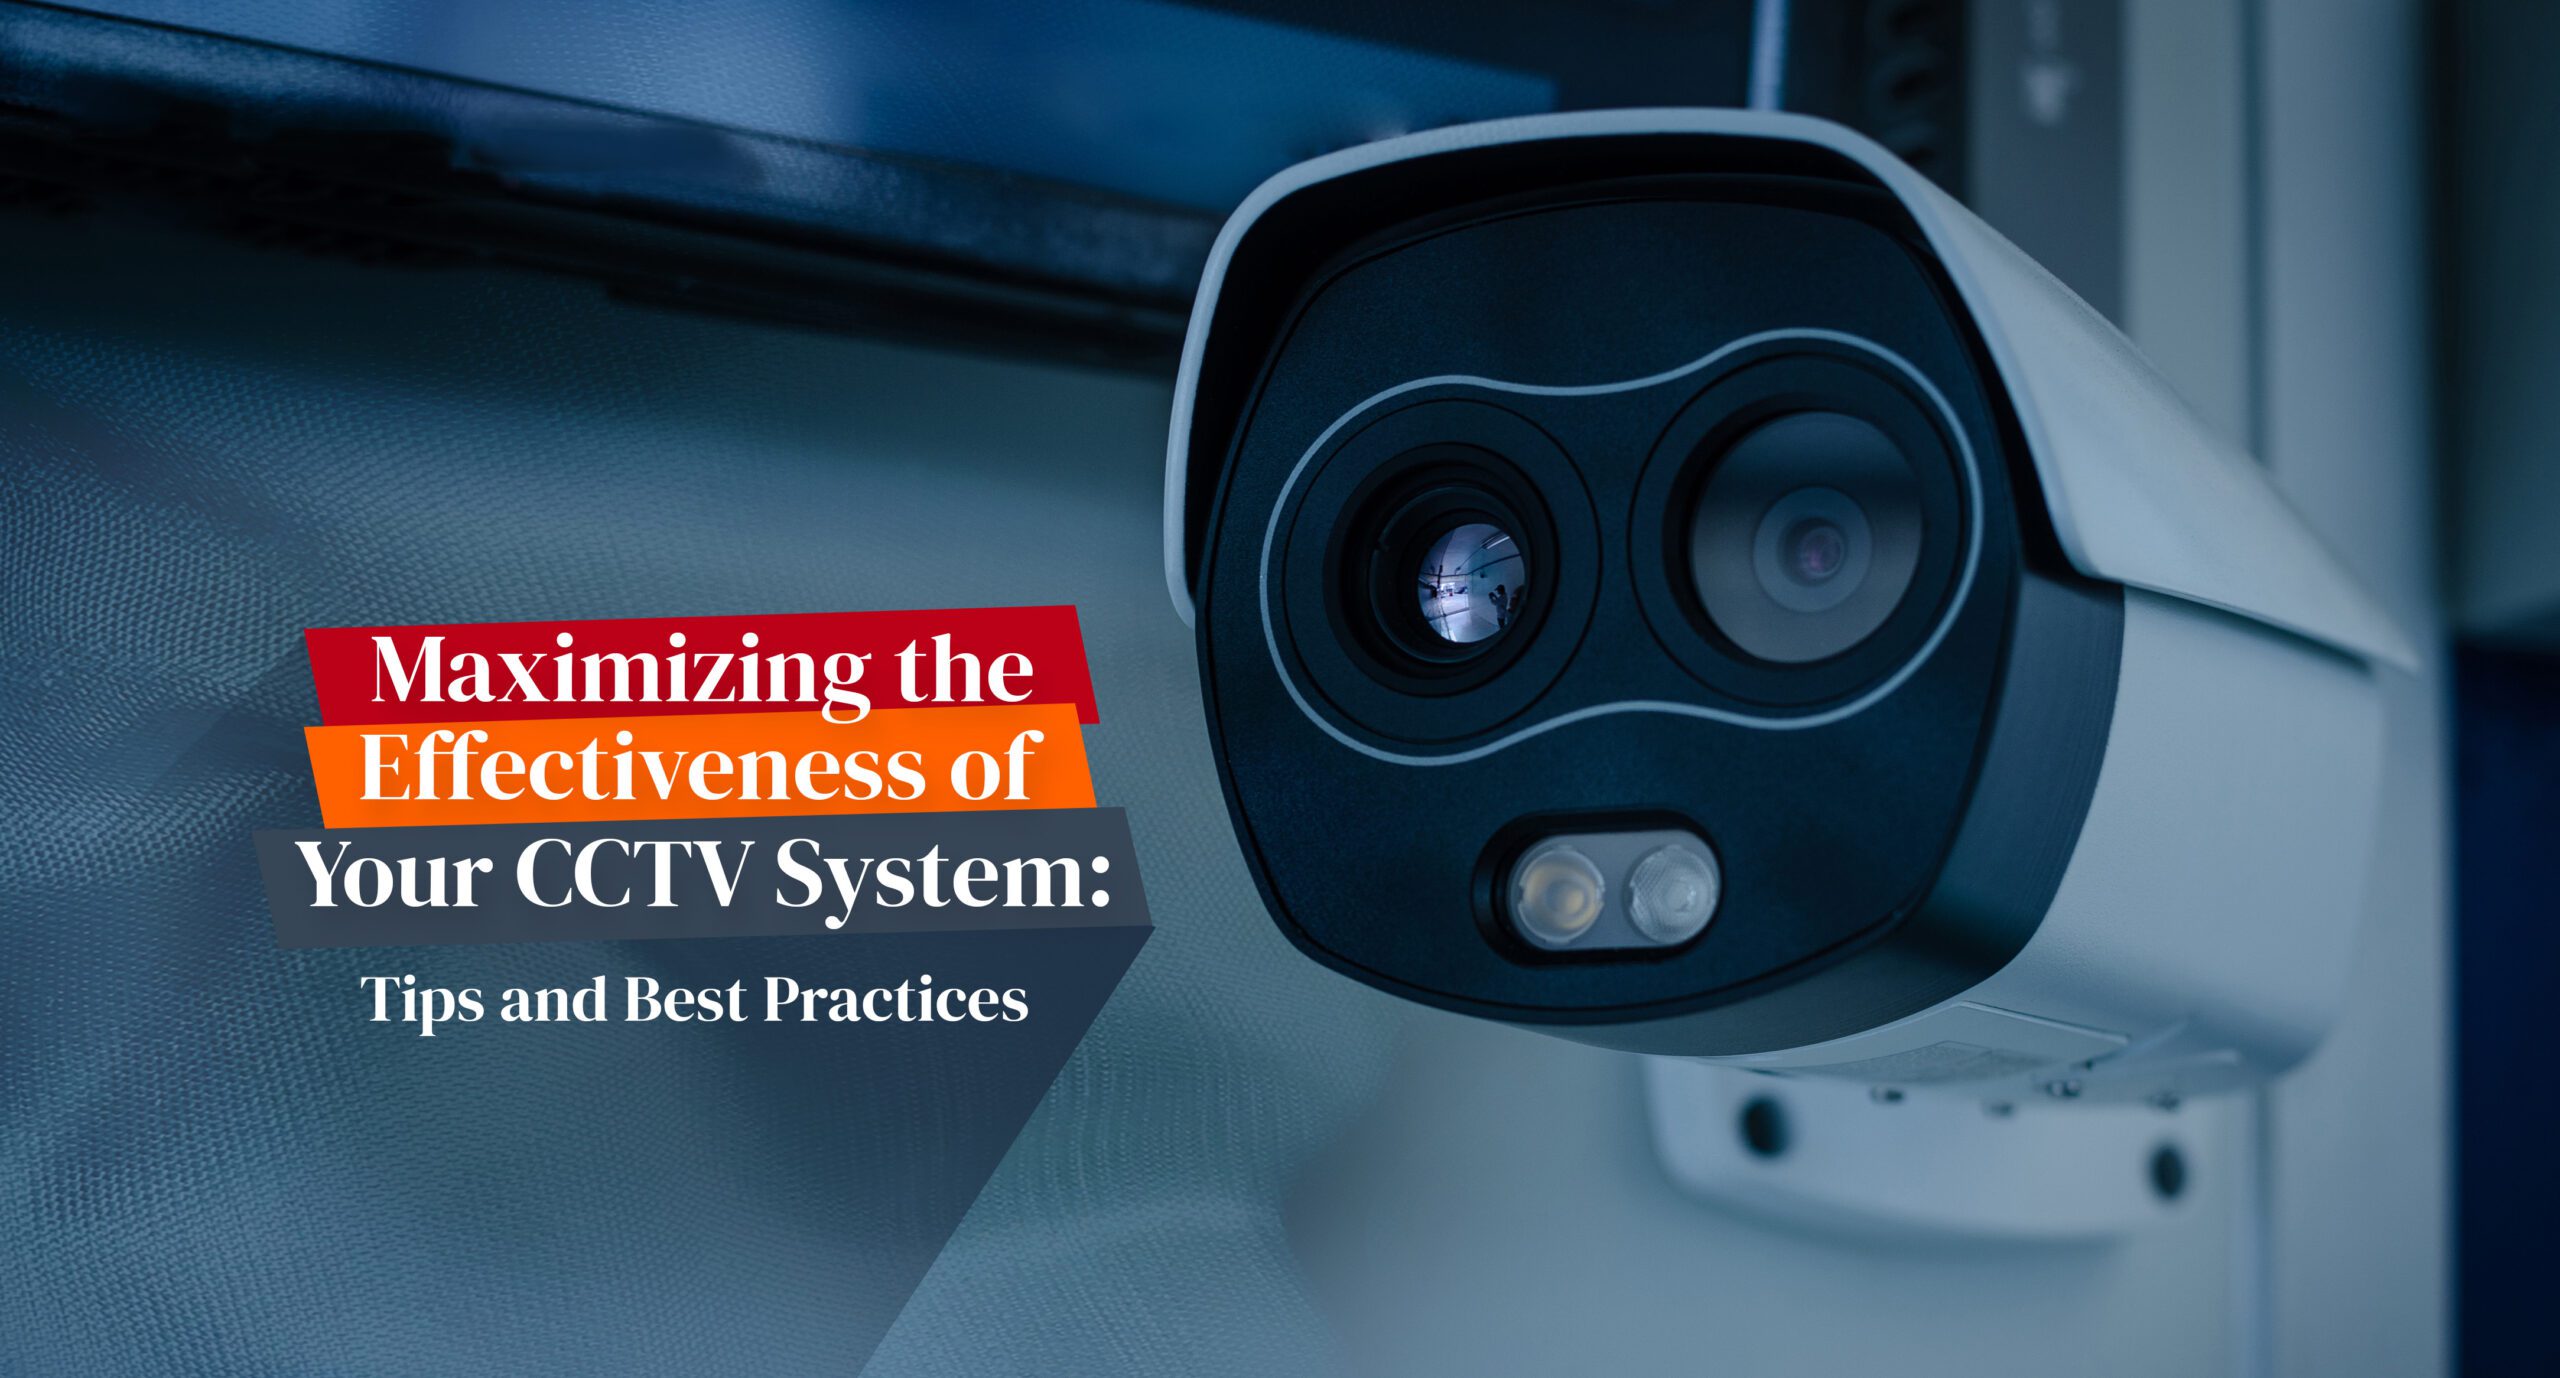 Featured image for “Maximizing the Effectiveness of your CCTV System: Tips and Best Practices”